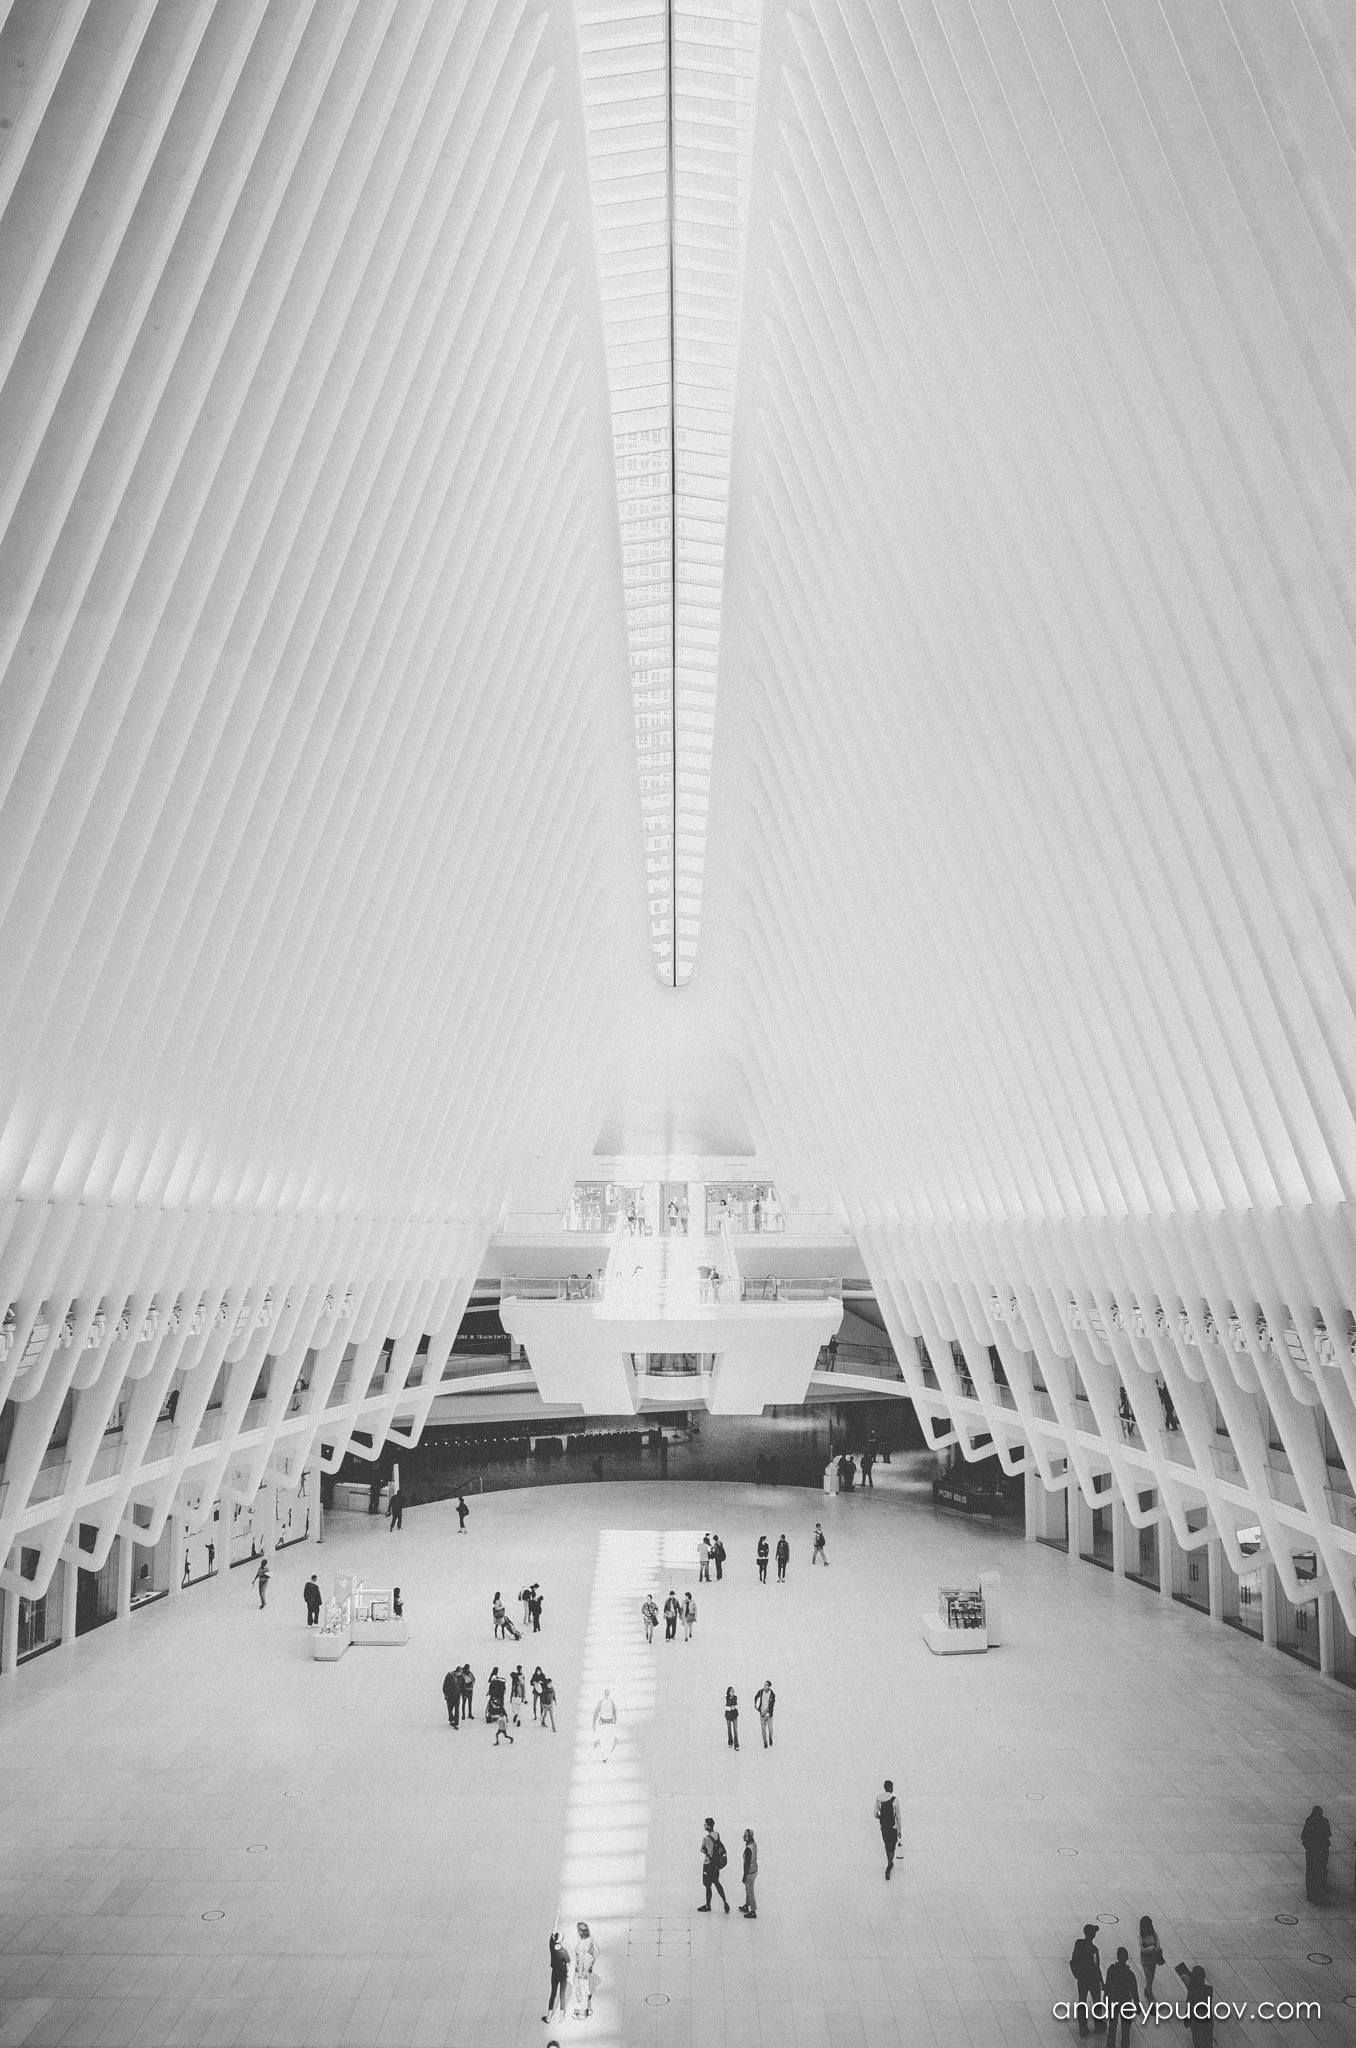 Favorite Photographs - Oculus / World Trade Center Station

One of the first decisions that Calatrava had in mind at the time of conceiving the project was the realization of the building at street level, an independent structure along the Wedge of Light Square, by Daniel Libeskind. “Oculus”, the centerpiece of the Transportation Center that presents the new station to the world is a kind of pause in the middle of the dense glass and steel towers that surround it.

The construction, due to constant delays, lasted 12 years and was finally inaugurated on March 3, 2016, without too many celebrations. The cost of its construction, $ 4 billion, greatly exceeded its original cost, becoming, until the time of its inauguration, the most expensive train station in the world and the third largest transportation center in New York, after Grand Central and Penn Station, both in Midtown Manhattan.